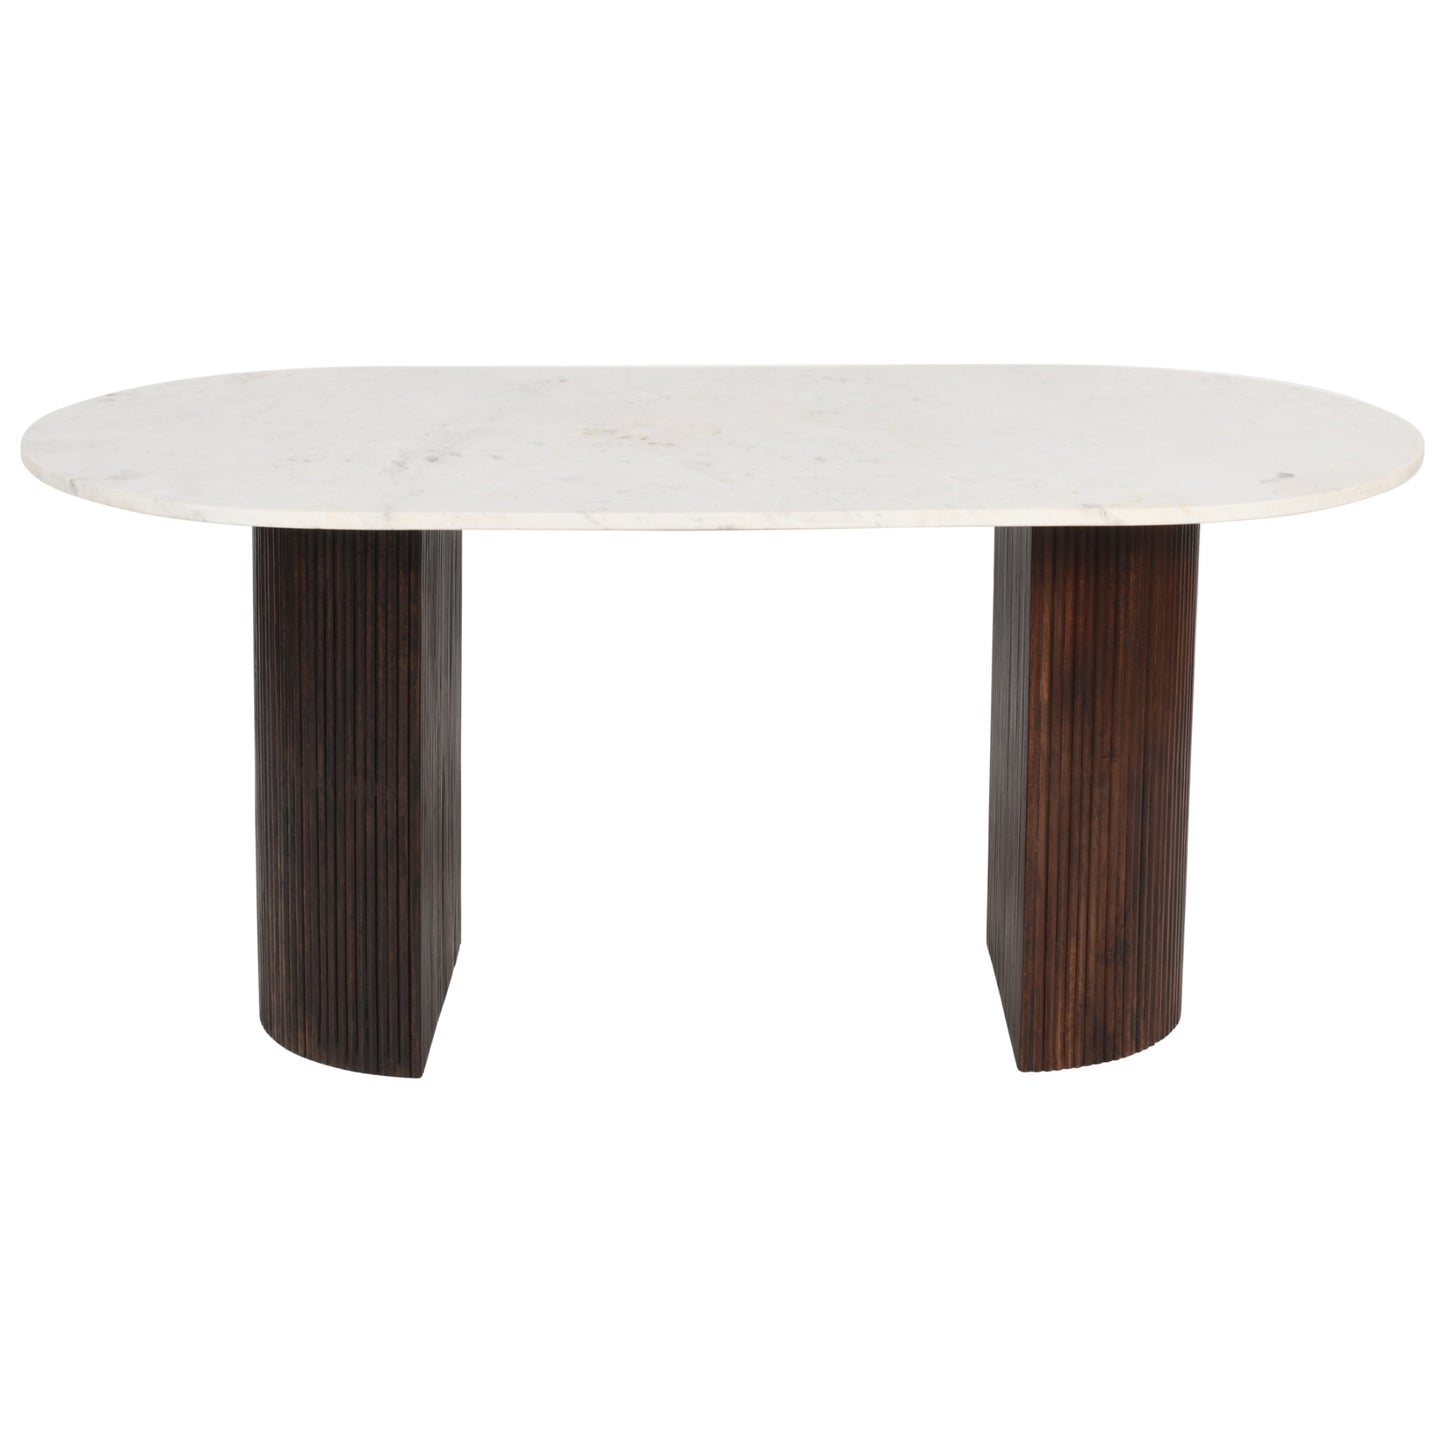 Opal Mango Wood Dining Table 170Cm With Marble Top